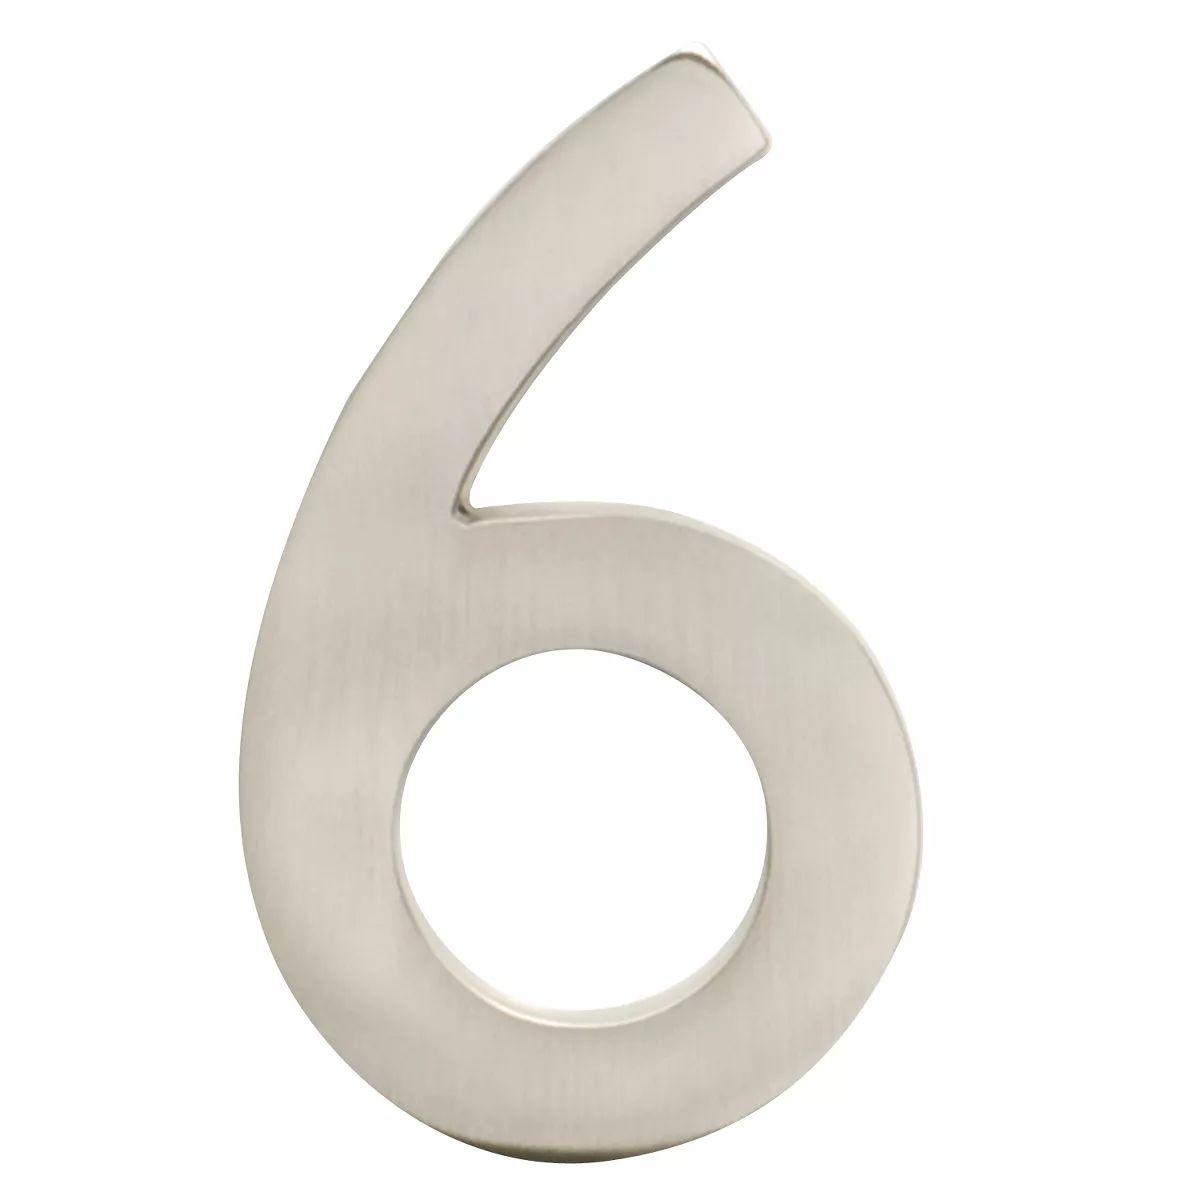 Architectural Mailboxes 4" Cast Floating House Number 6 Nickel | Target